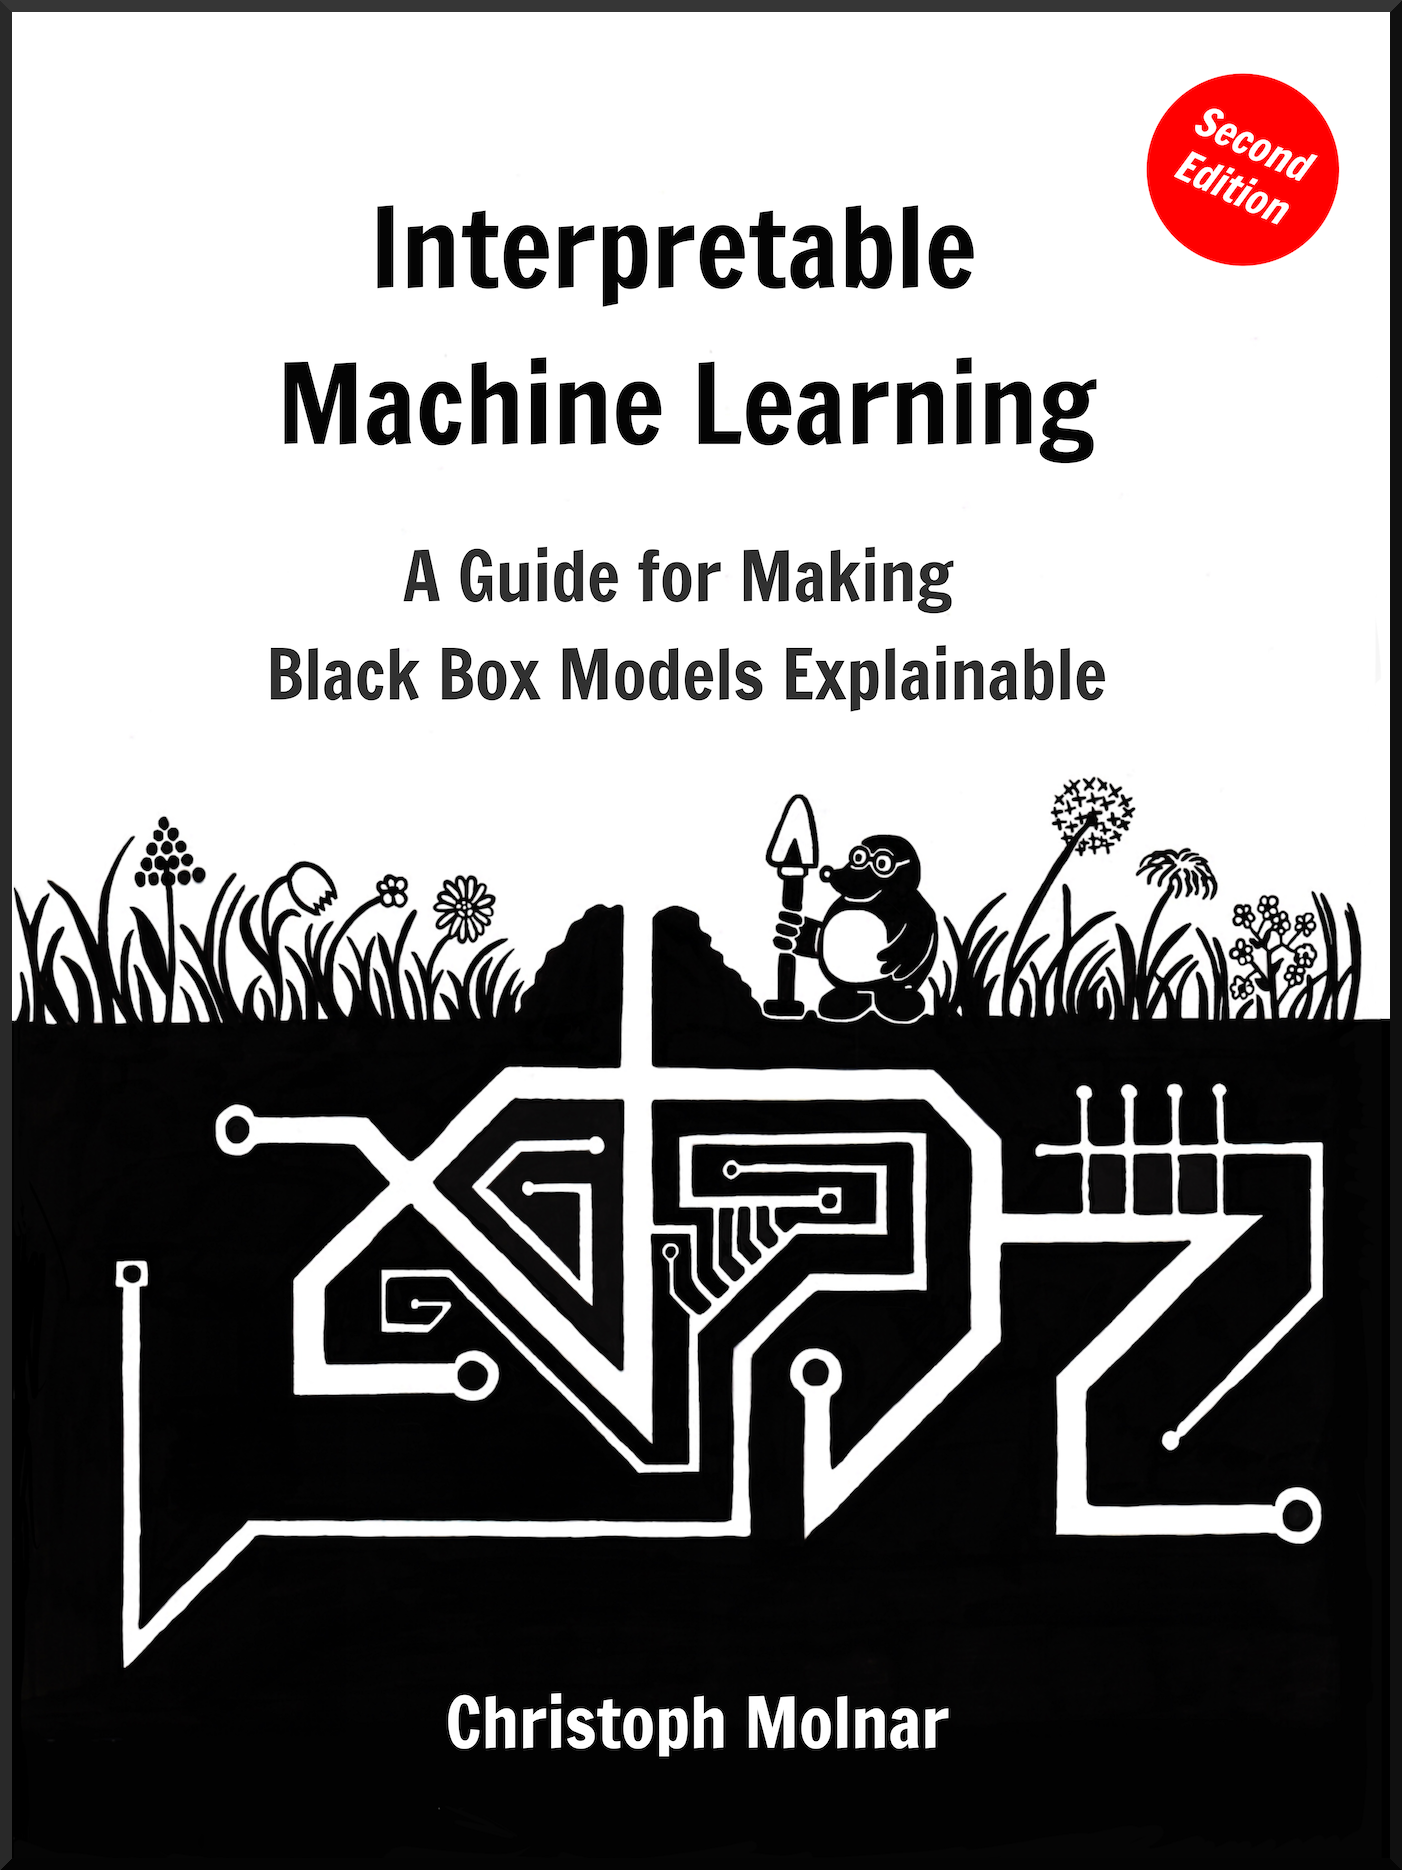 Find-S Algorithm In Machine Learning: Concept Learning